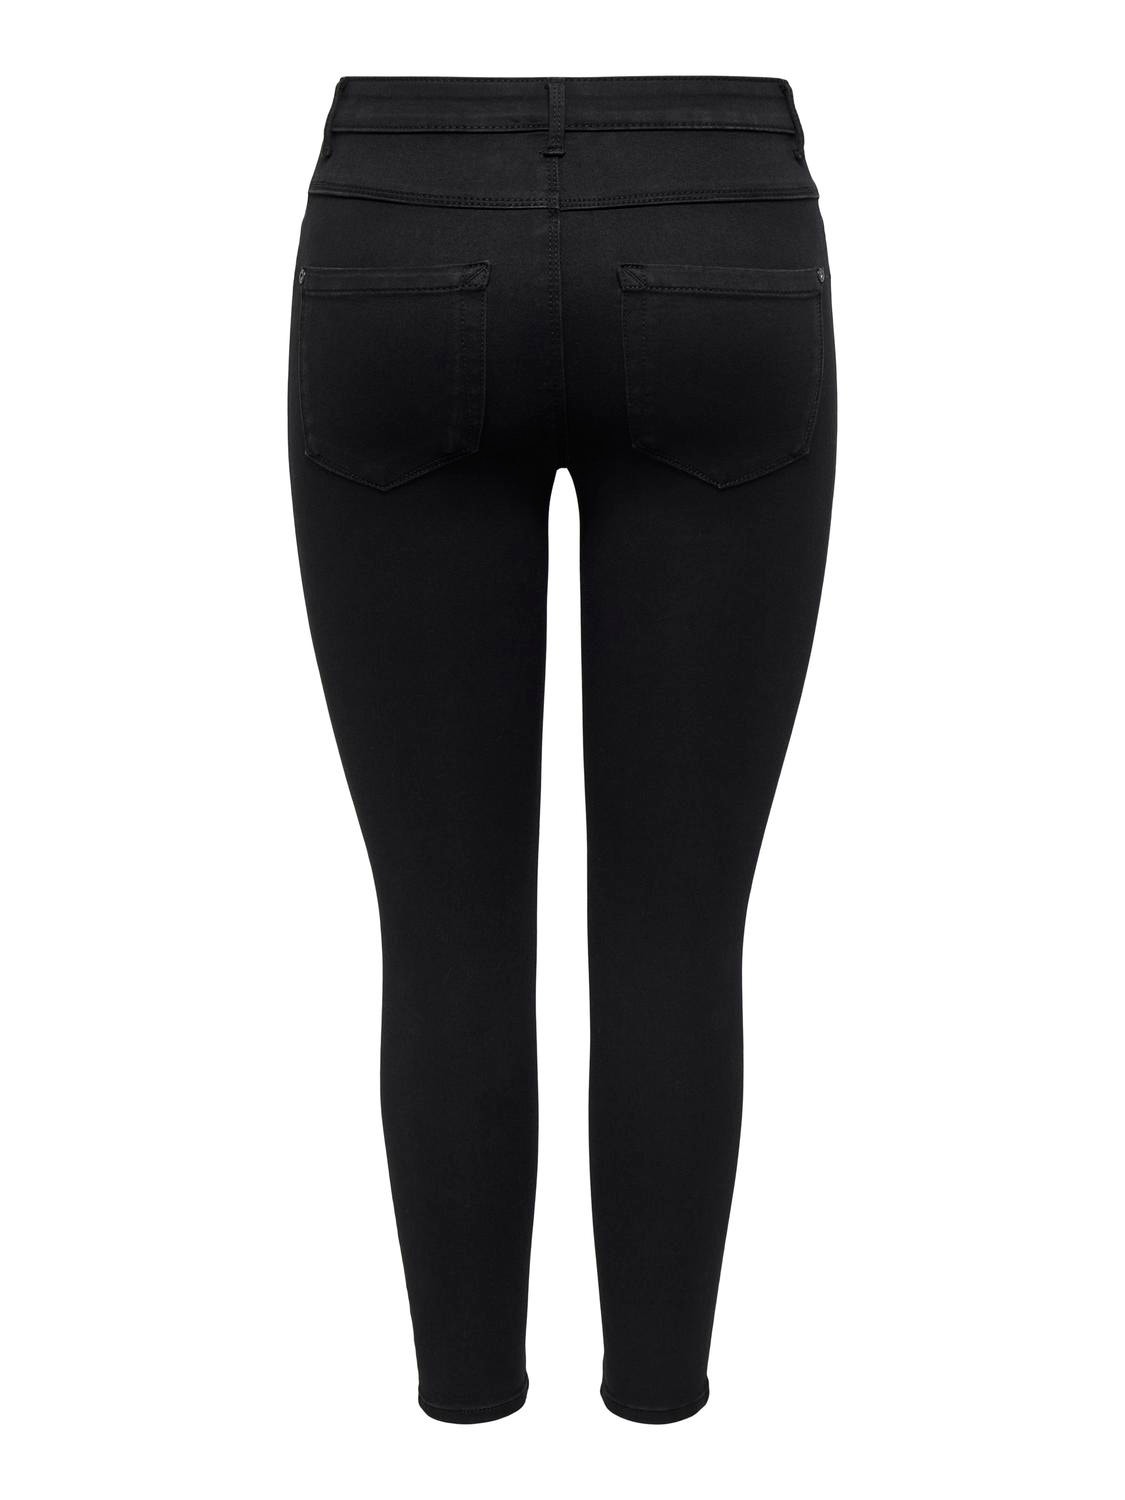 ONLY ONLROYAL HIGH SK JEANS 600 PETIT NOOS -Black - 15178993